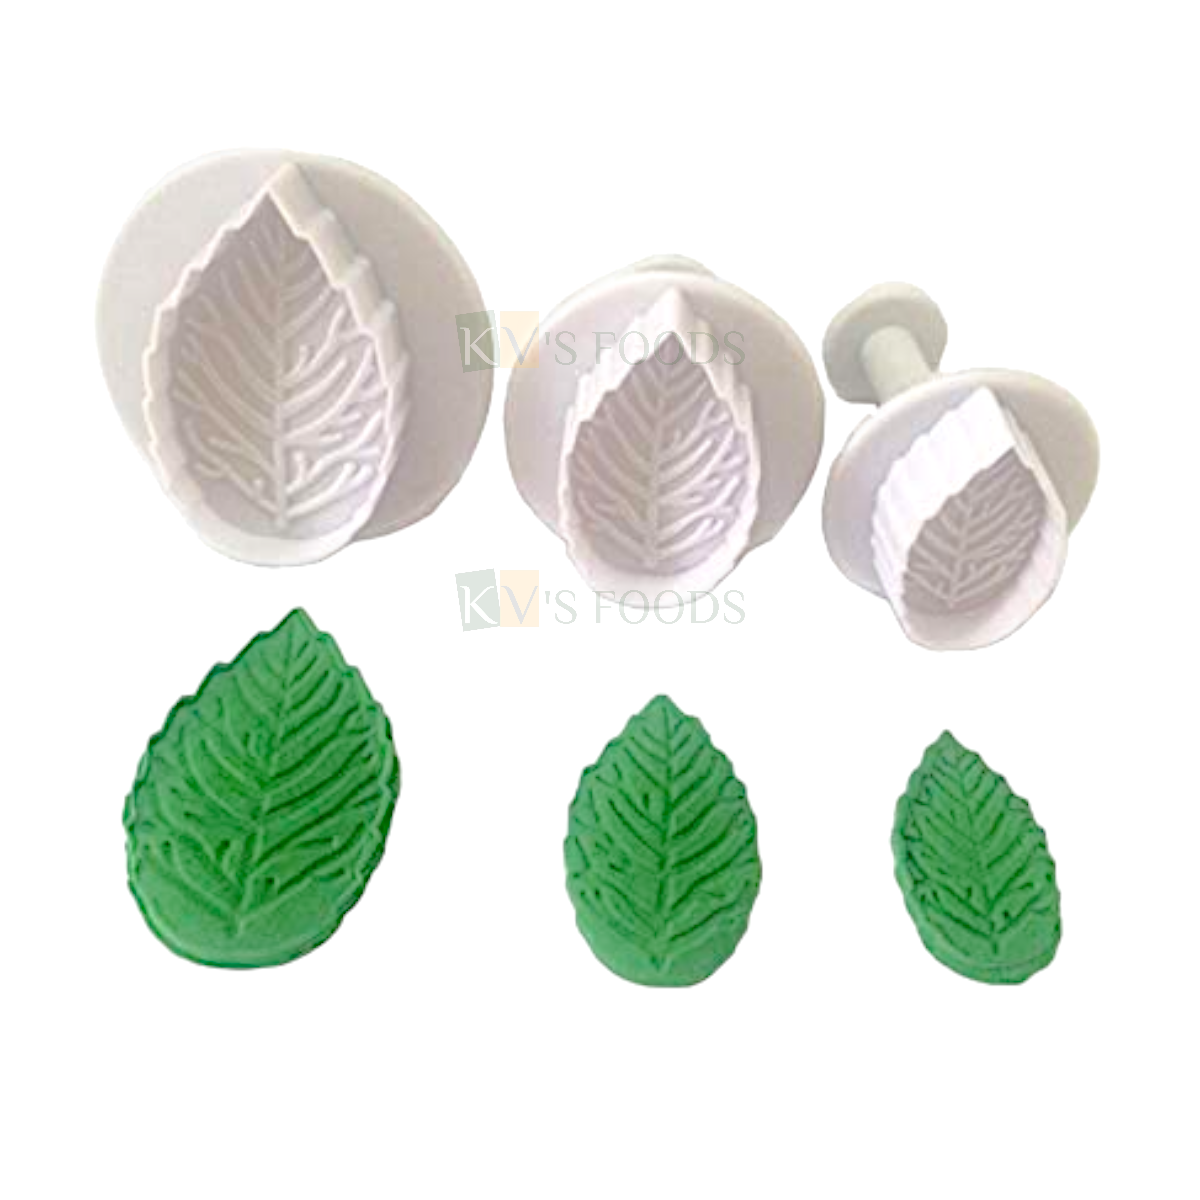 3 PCS White Veined Rose Leaves Fondant Plunger Cutters Stamps, Molds, Embossing Spring Mold Printed Presses Impression Biscuits Chocolates Pancake Cheese Pastry, Wedding Anniversary Cakes Decorations